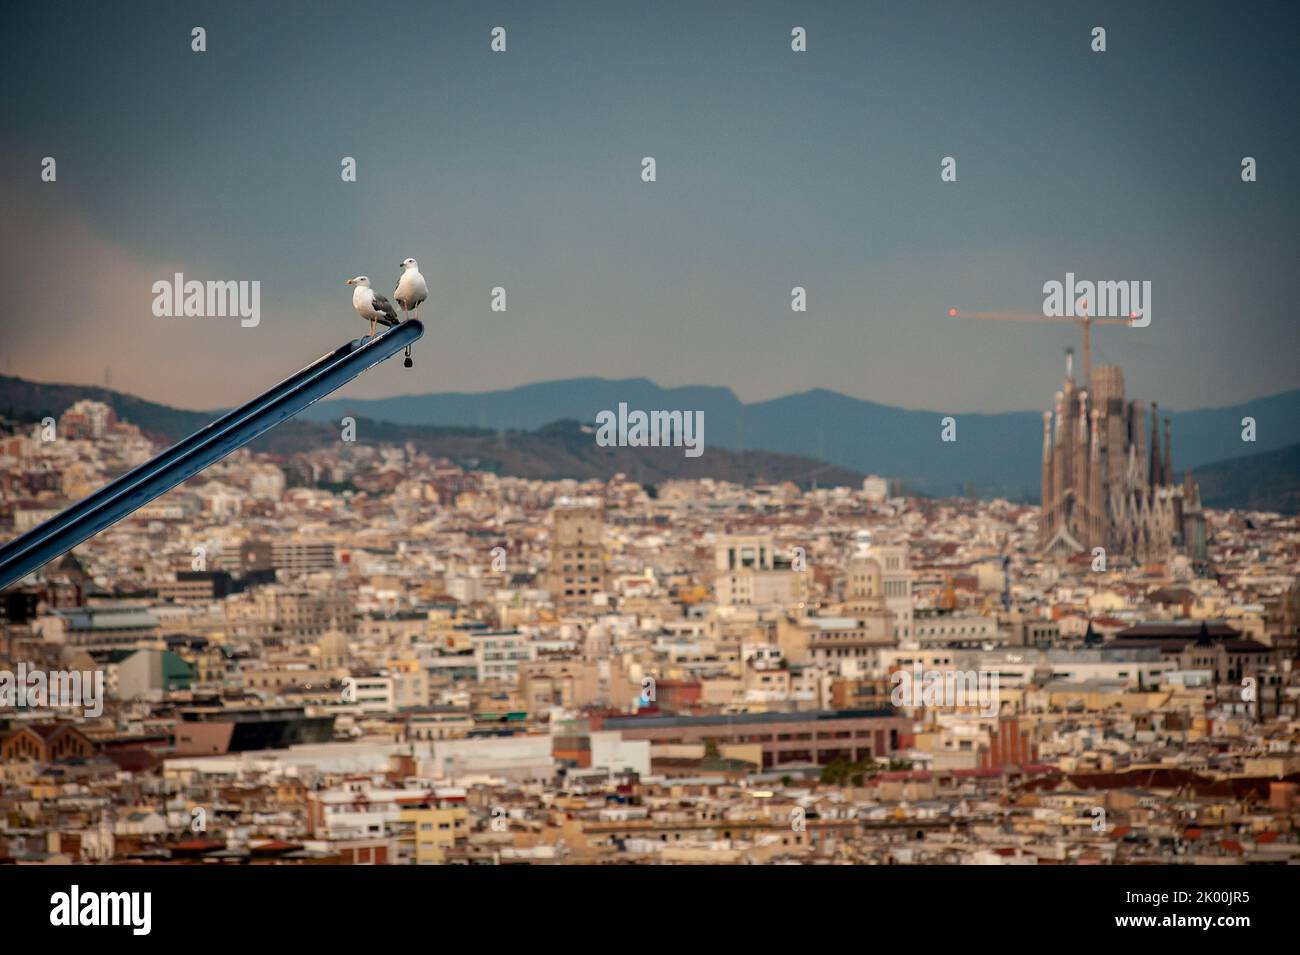 Aerial view of Barcelona with the Sagrada Familia and two seagulls Stock Photo